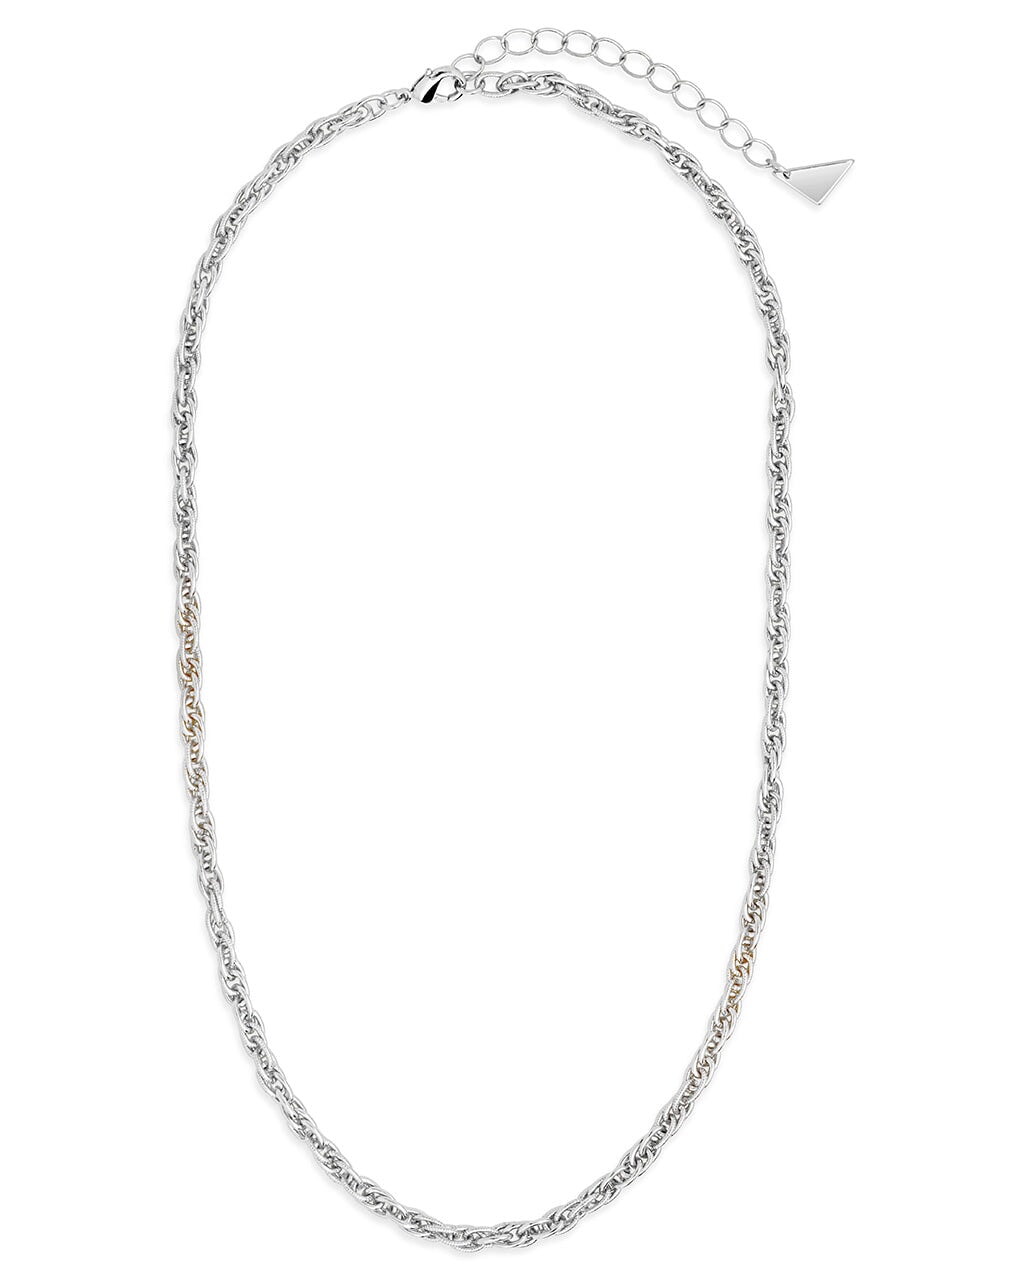 Alex Chain Necklace Necklace Sterling Forever 